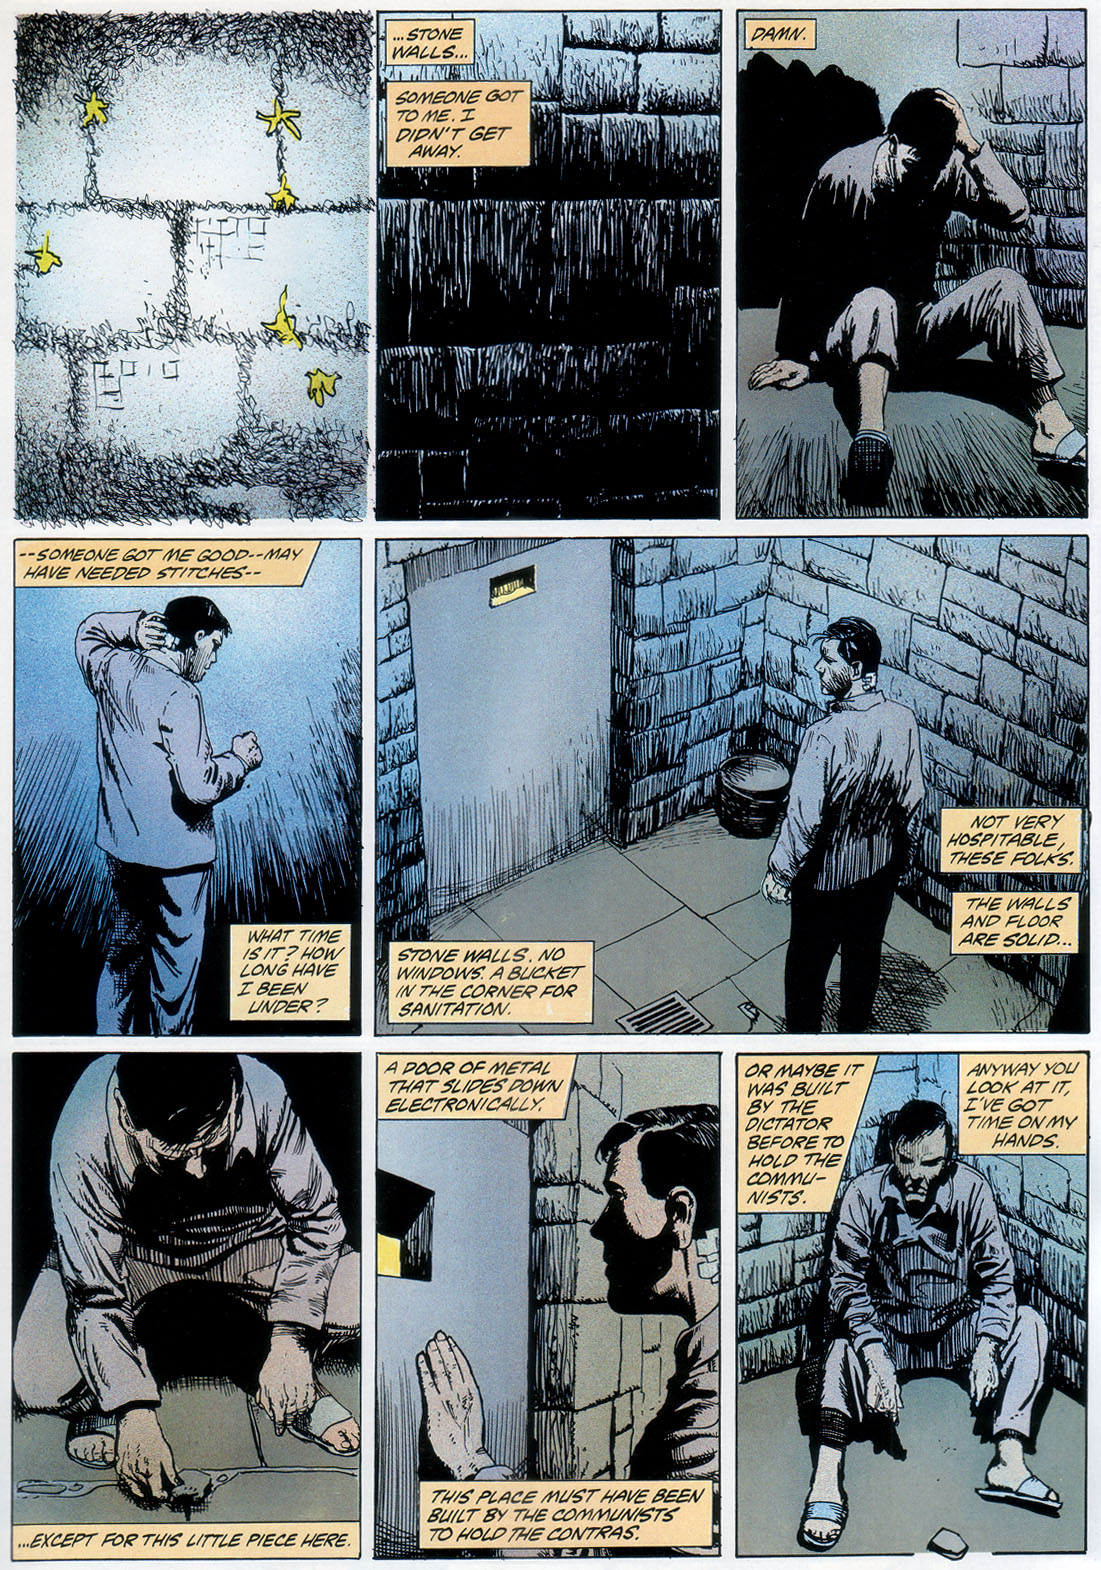 Marvel Graphic Novel issue 57 - Rick Mason - The Agent - Page 57